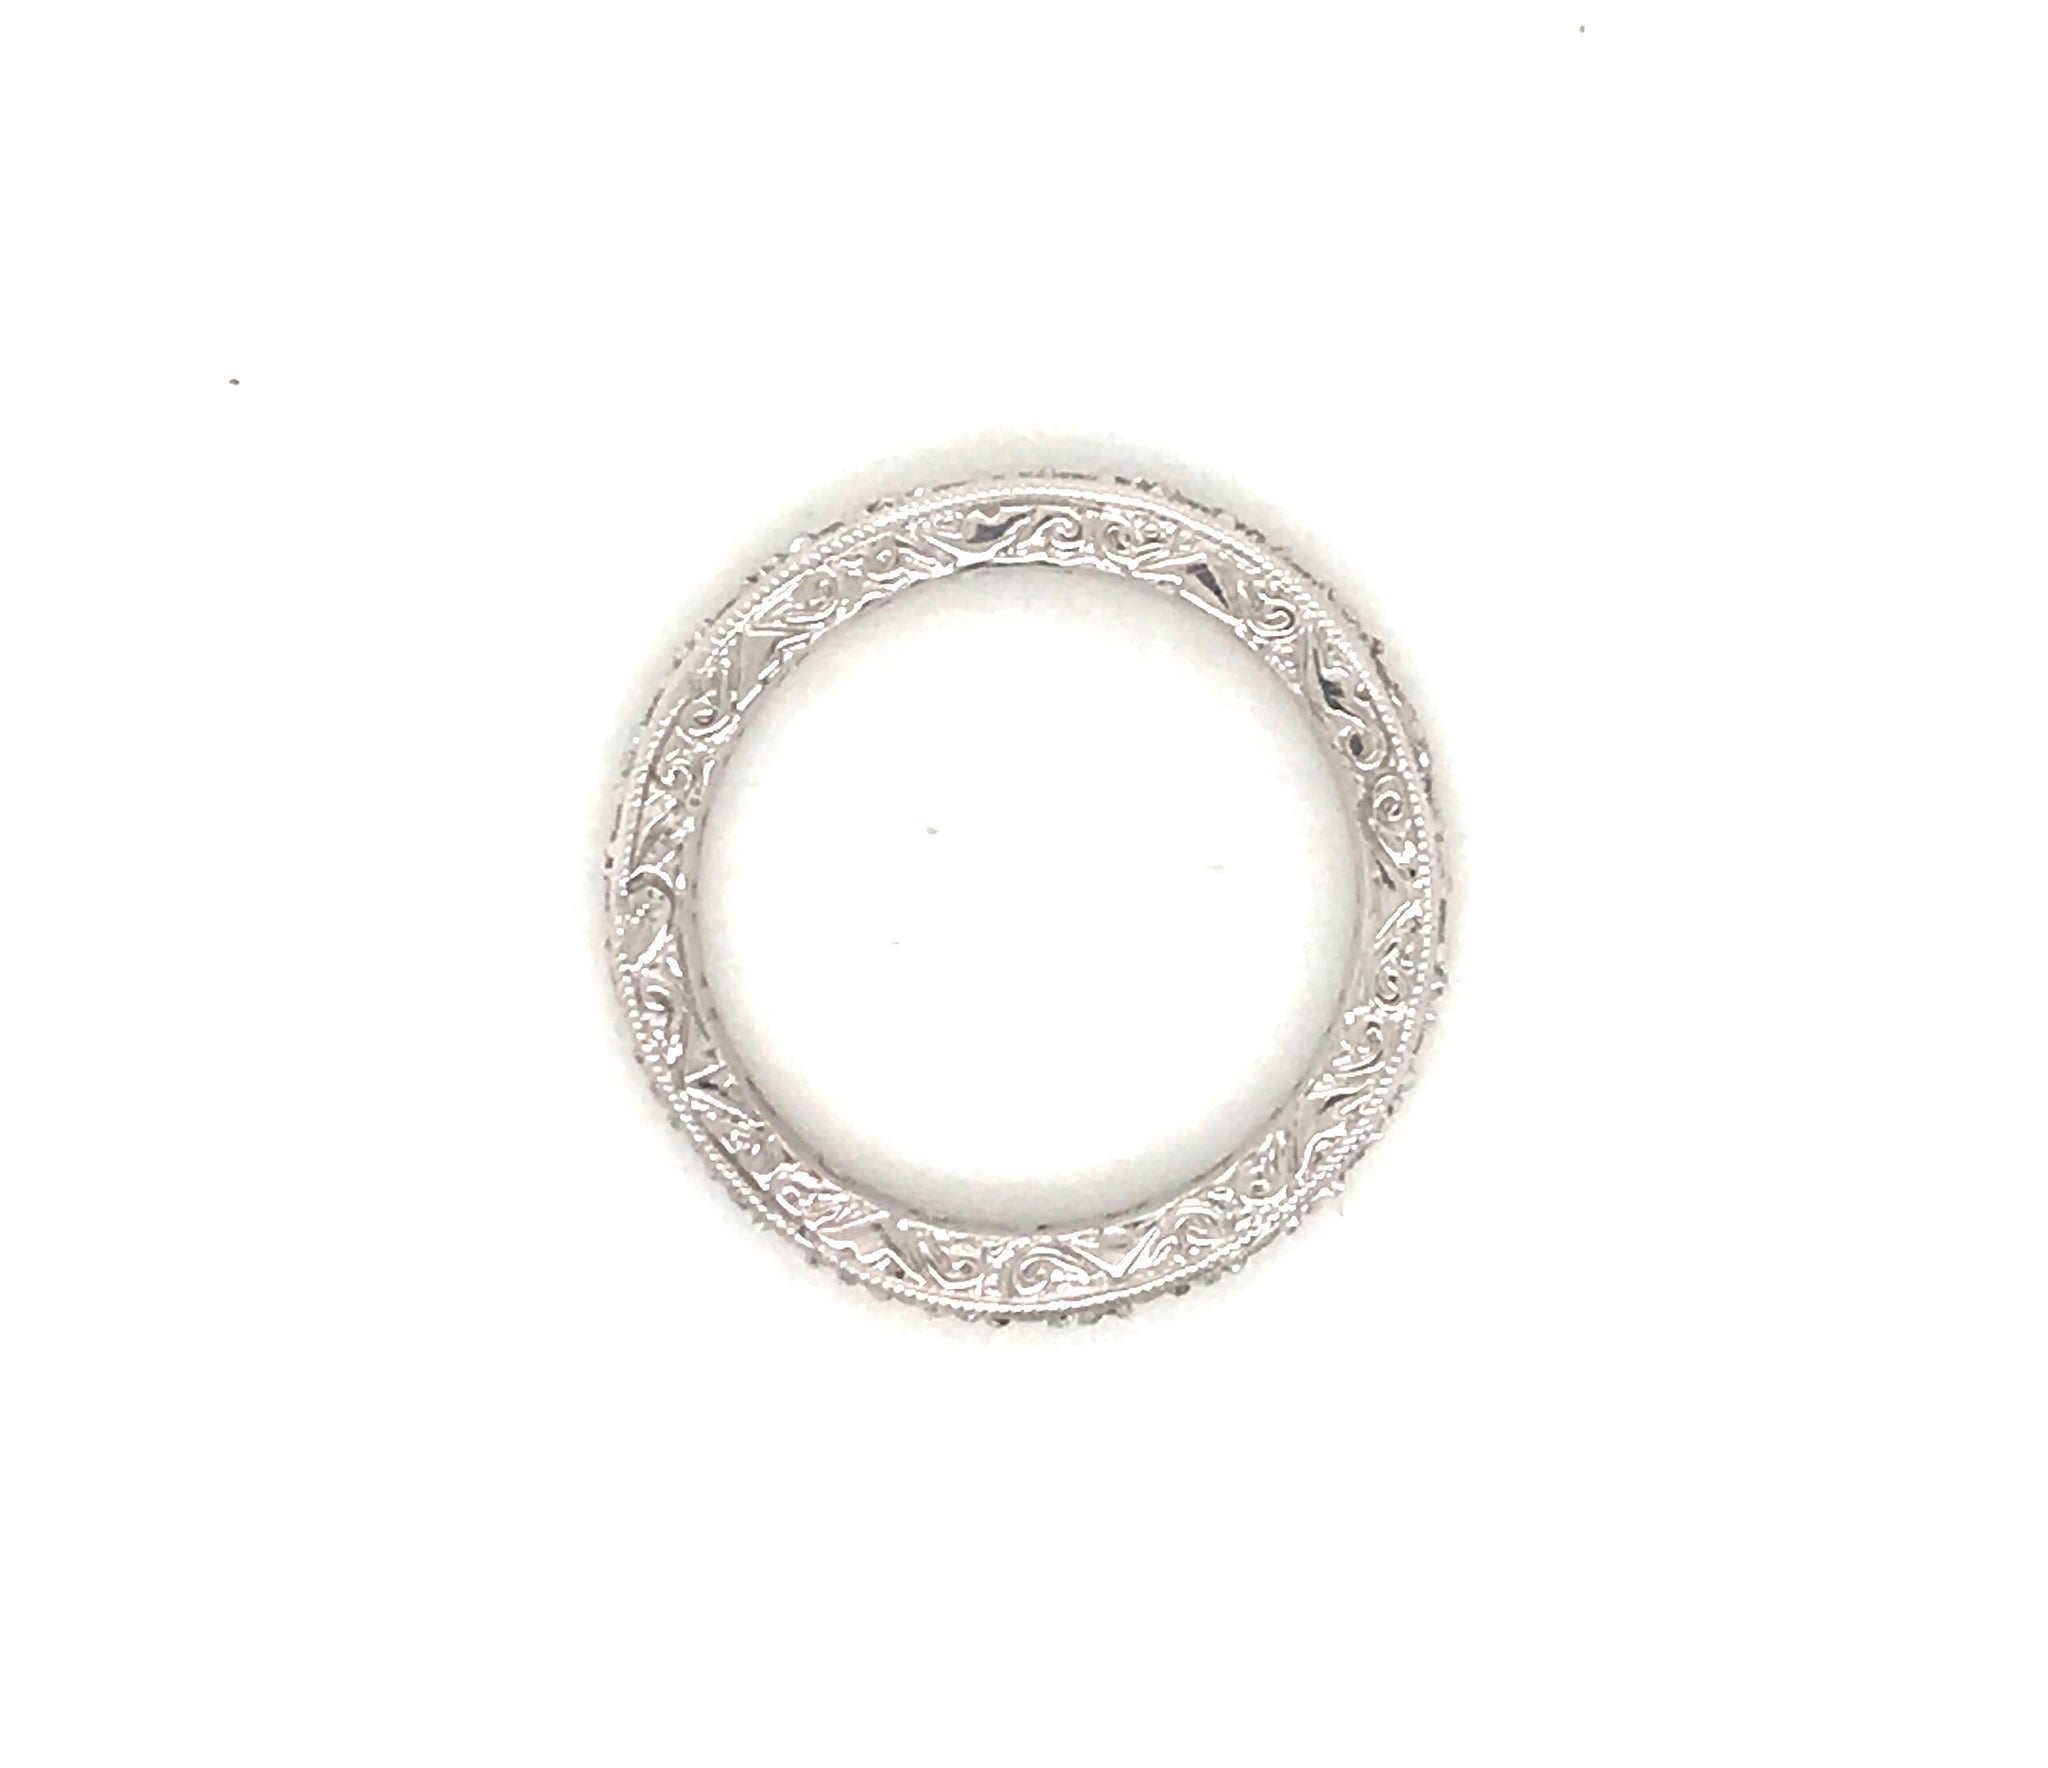 Variation test of 18kt white gold Pave' Linear Thin Eternity Band